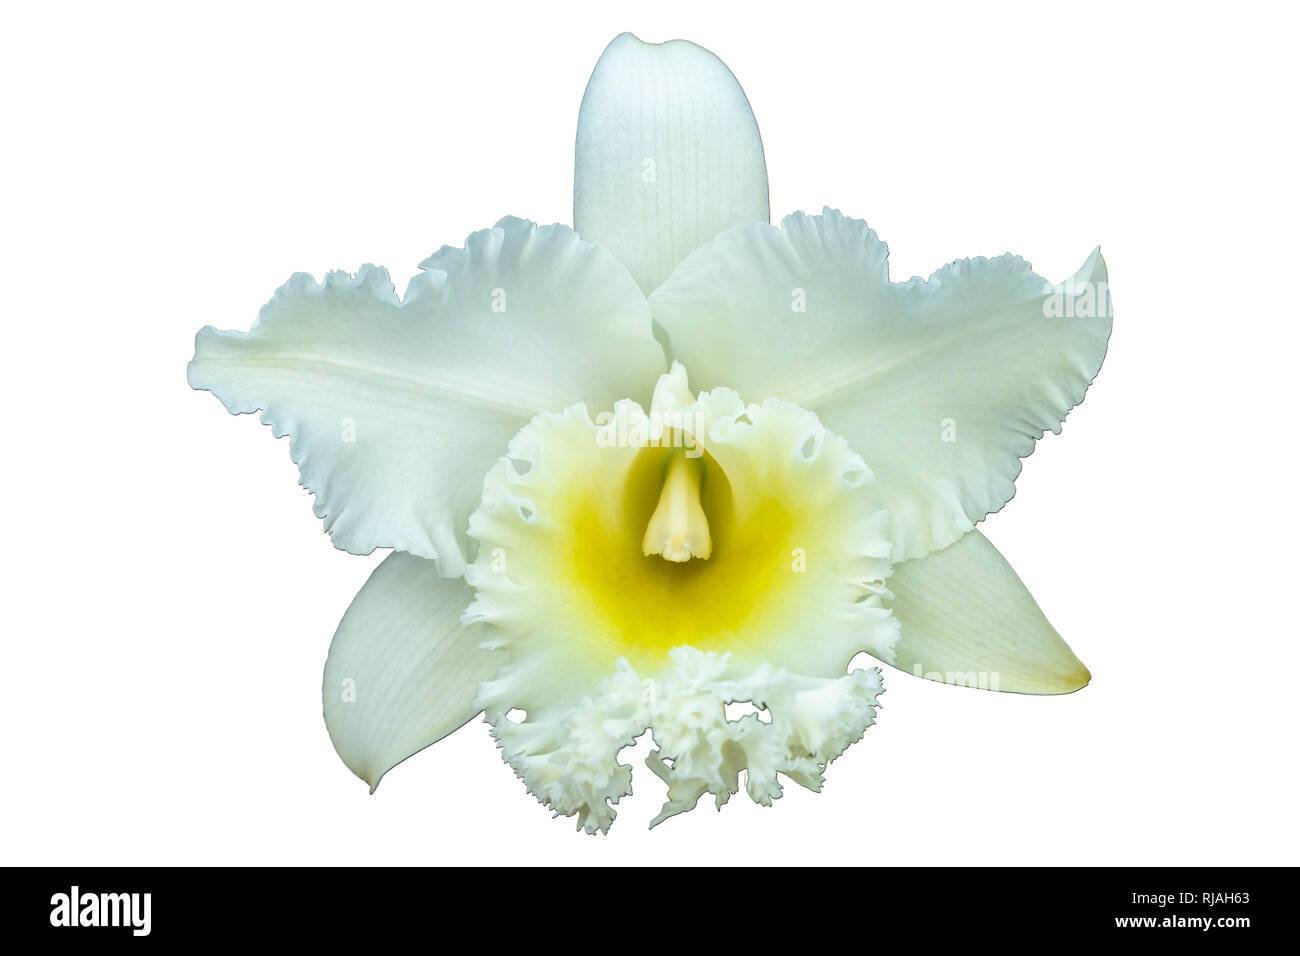 White Cattleya orchid Cattleya are orchid with white petals are layer yellow pollen Cattleya have clipping path on white background. Stock Photo